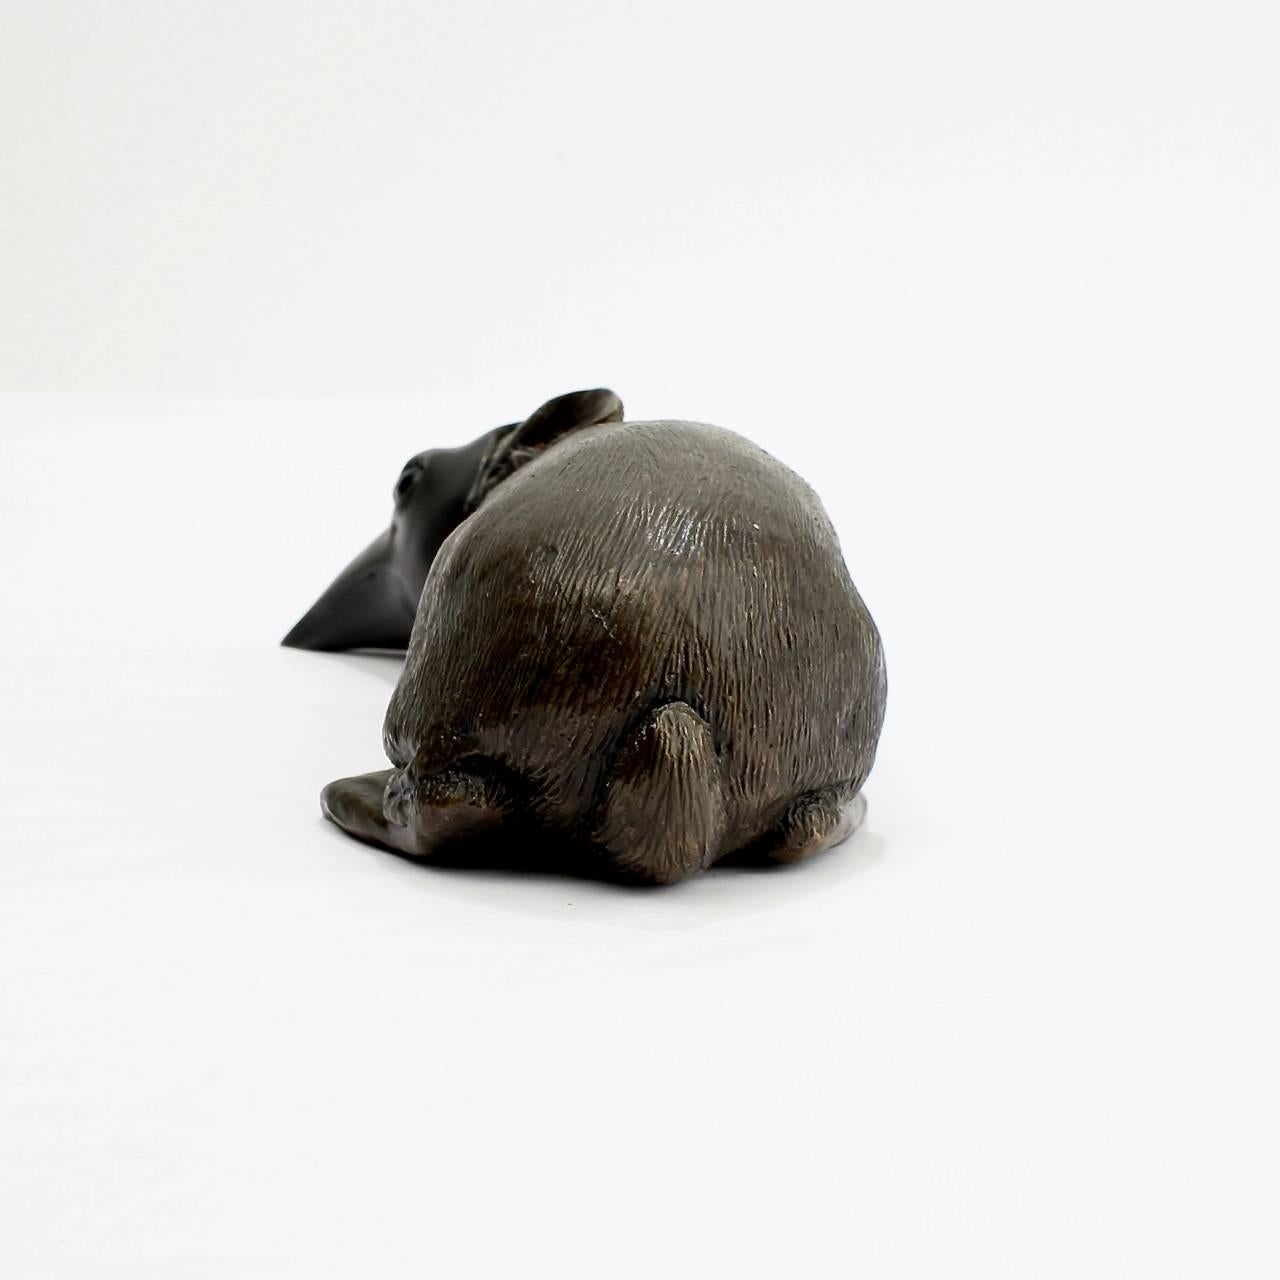 Modern Darla Jackson Baby Bunny with Crow's Mask Bronze Sculpture, 2015 For Sale